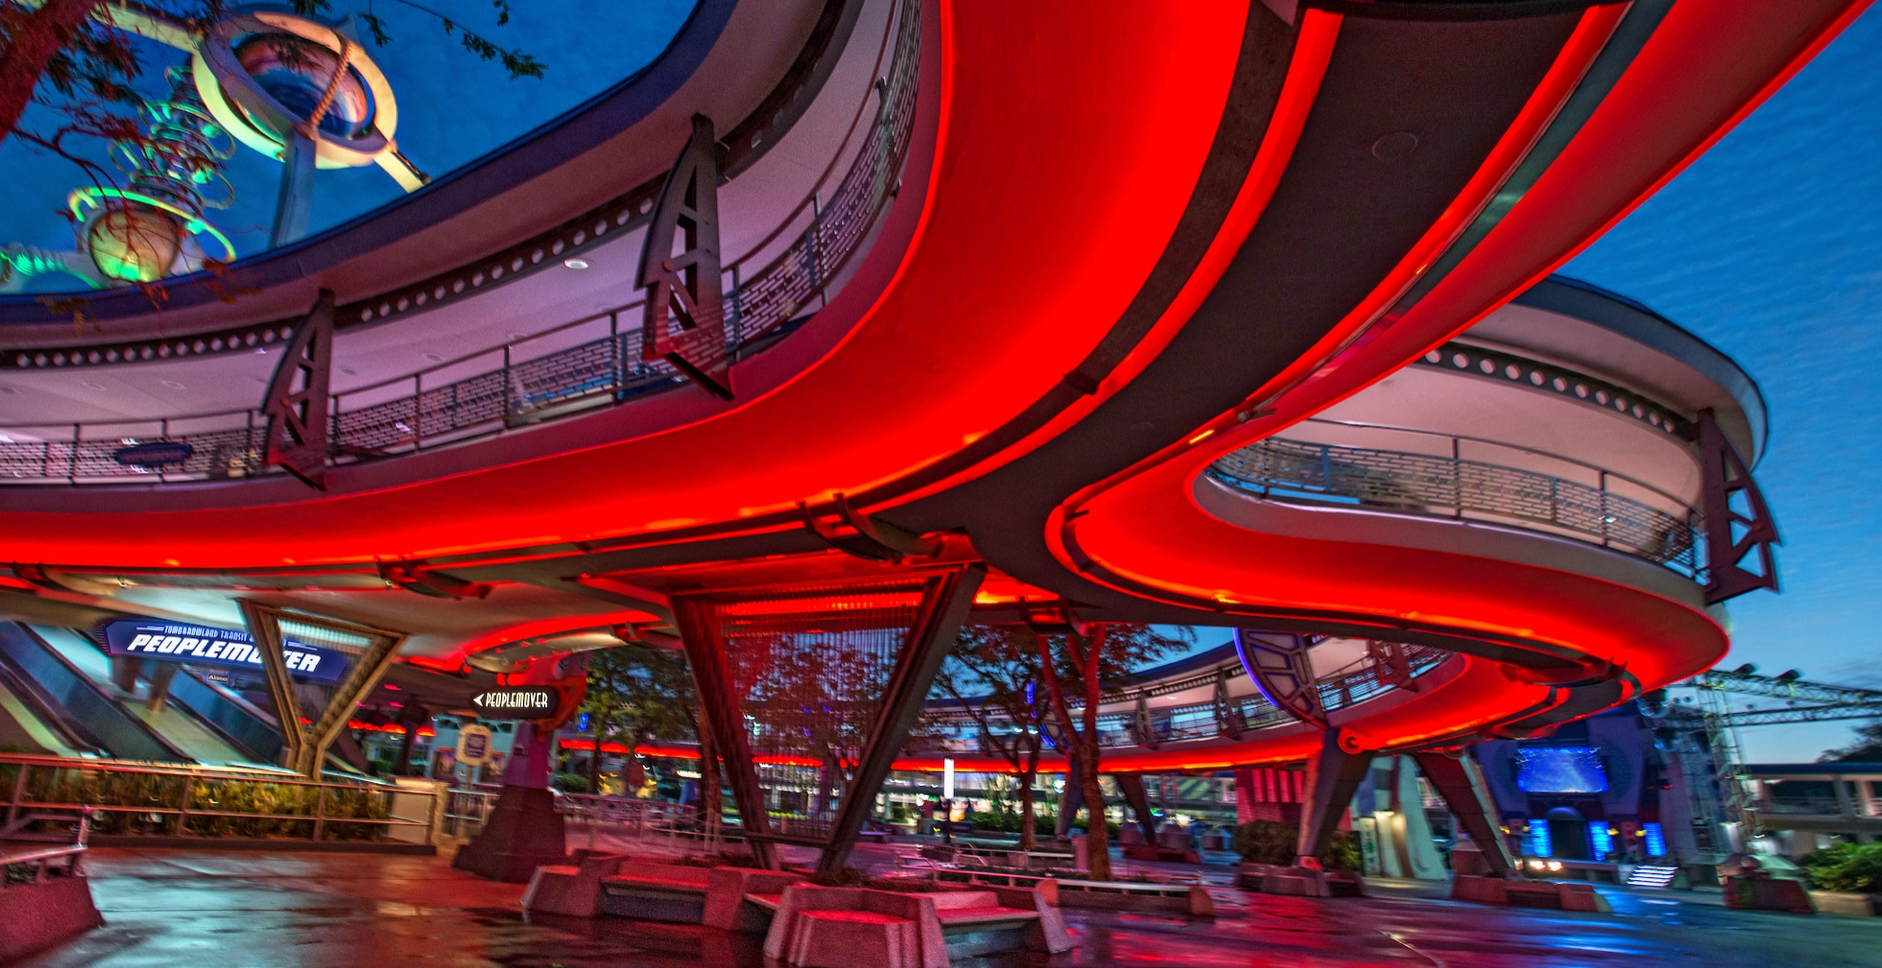 Tomorrowland Transit Authority PeopleMover extends closure through February – Disney Matters